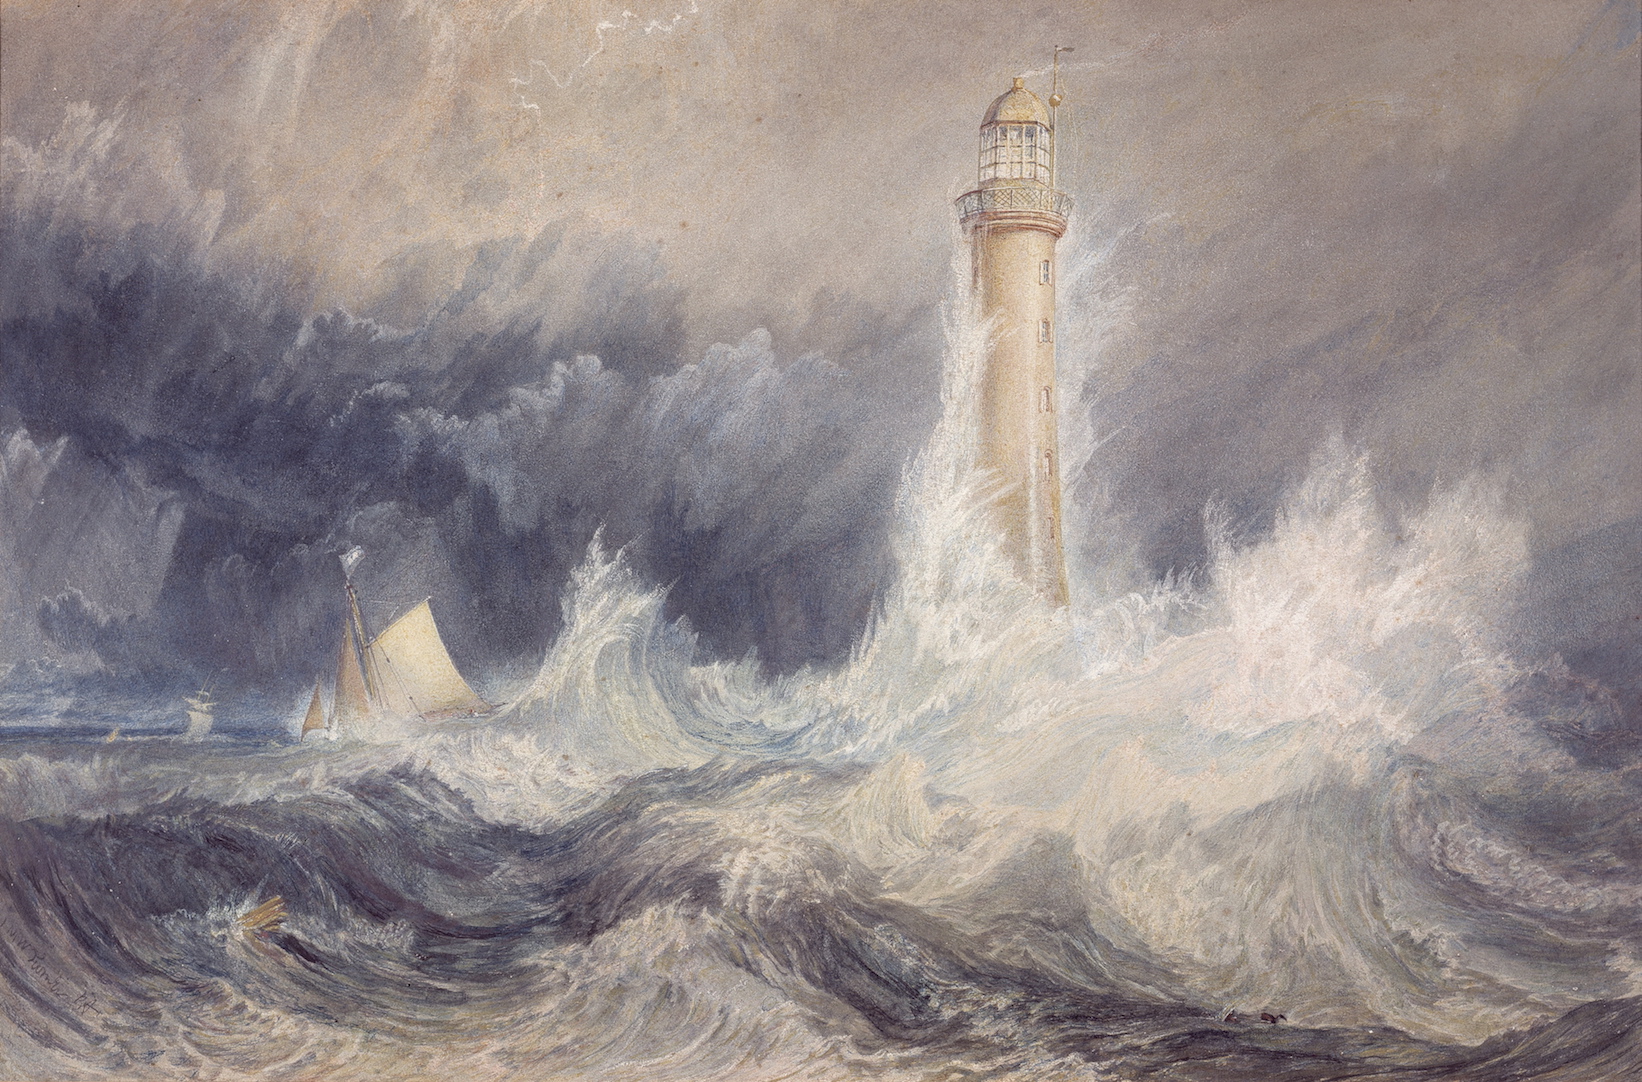 Joseph Mallord William (JMW) Turner The Bell Rock lighthouse 1819 watercolour and gouache with scratching out on paper 30.6 x 45.5 cm Scottish National Gallery, Edinburgh © Trustees of the National Galleries of Scotland ***This image may only be used in conjunction with editorial coverage of The Greats exhibition, 24 Oct 2015 - 14 Feb 2016, at the Art Gallery of New South Wales. This image may not be cropped or overwritten. Prior approval in writing required for use as a cover. Caption details must accompany reproduction of the image. *** Media contact: Lisa.Catt@ag.nsw.gov.au